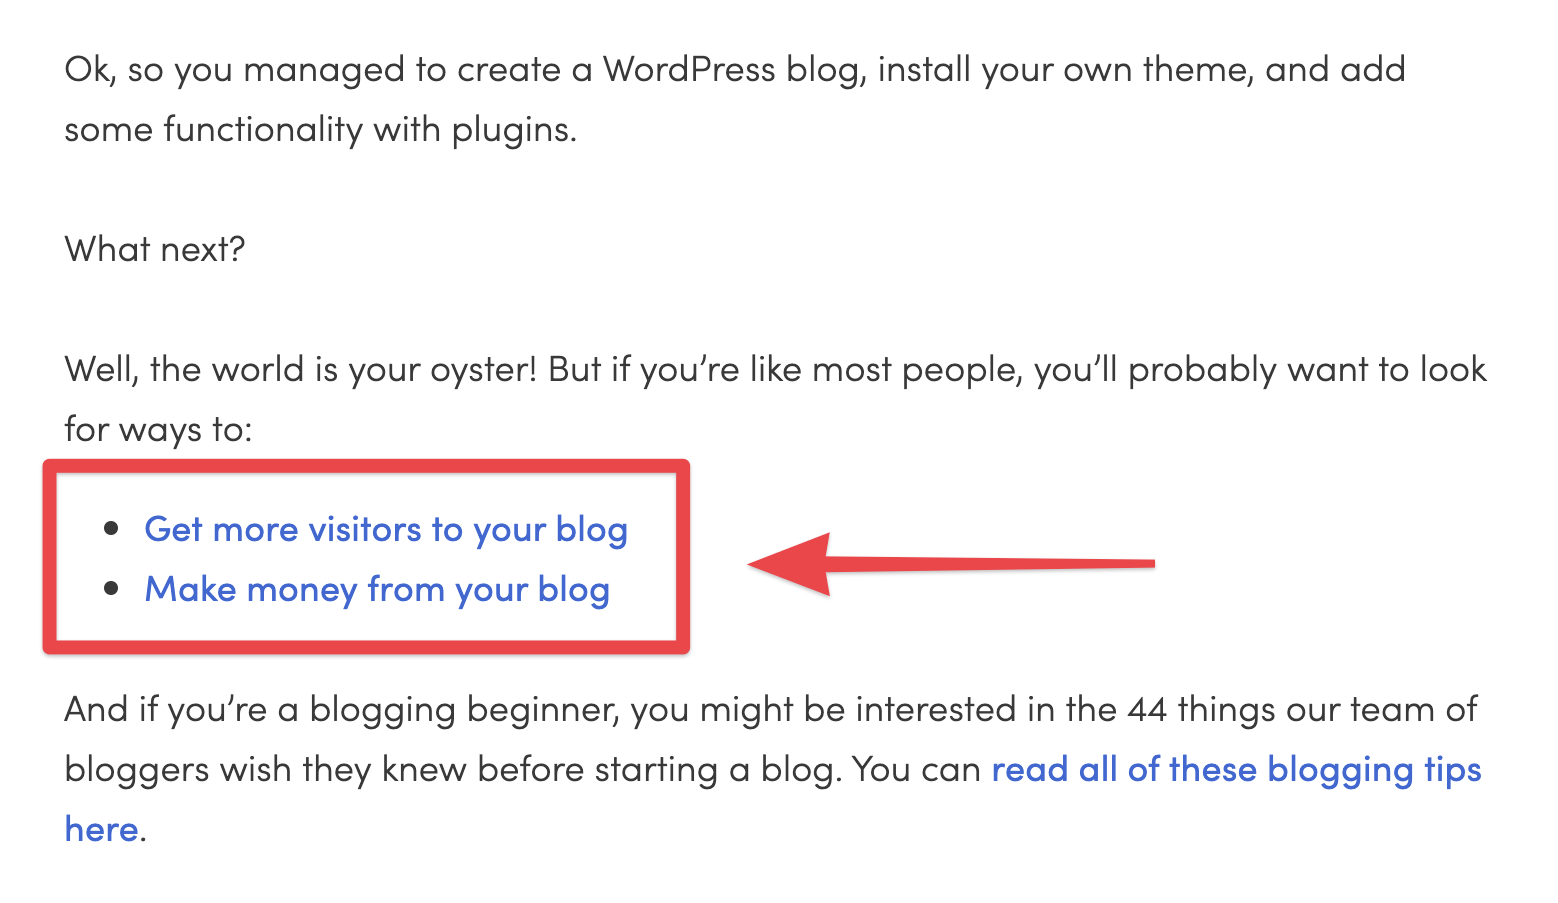 Reduce the carbon footprint of your WordPress blog with good internal linking and anchor text like this